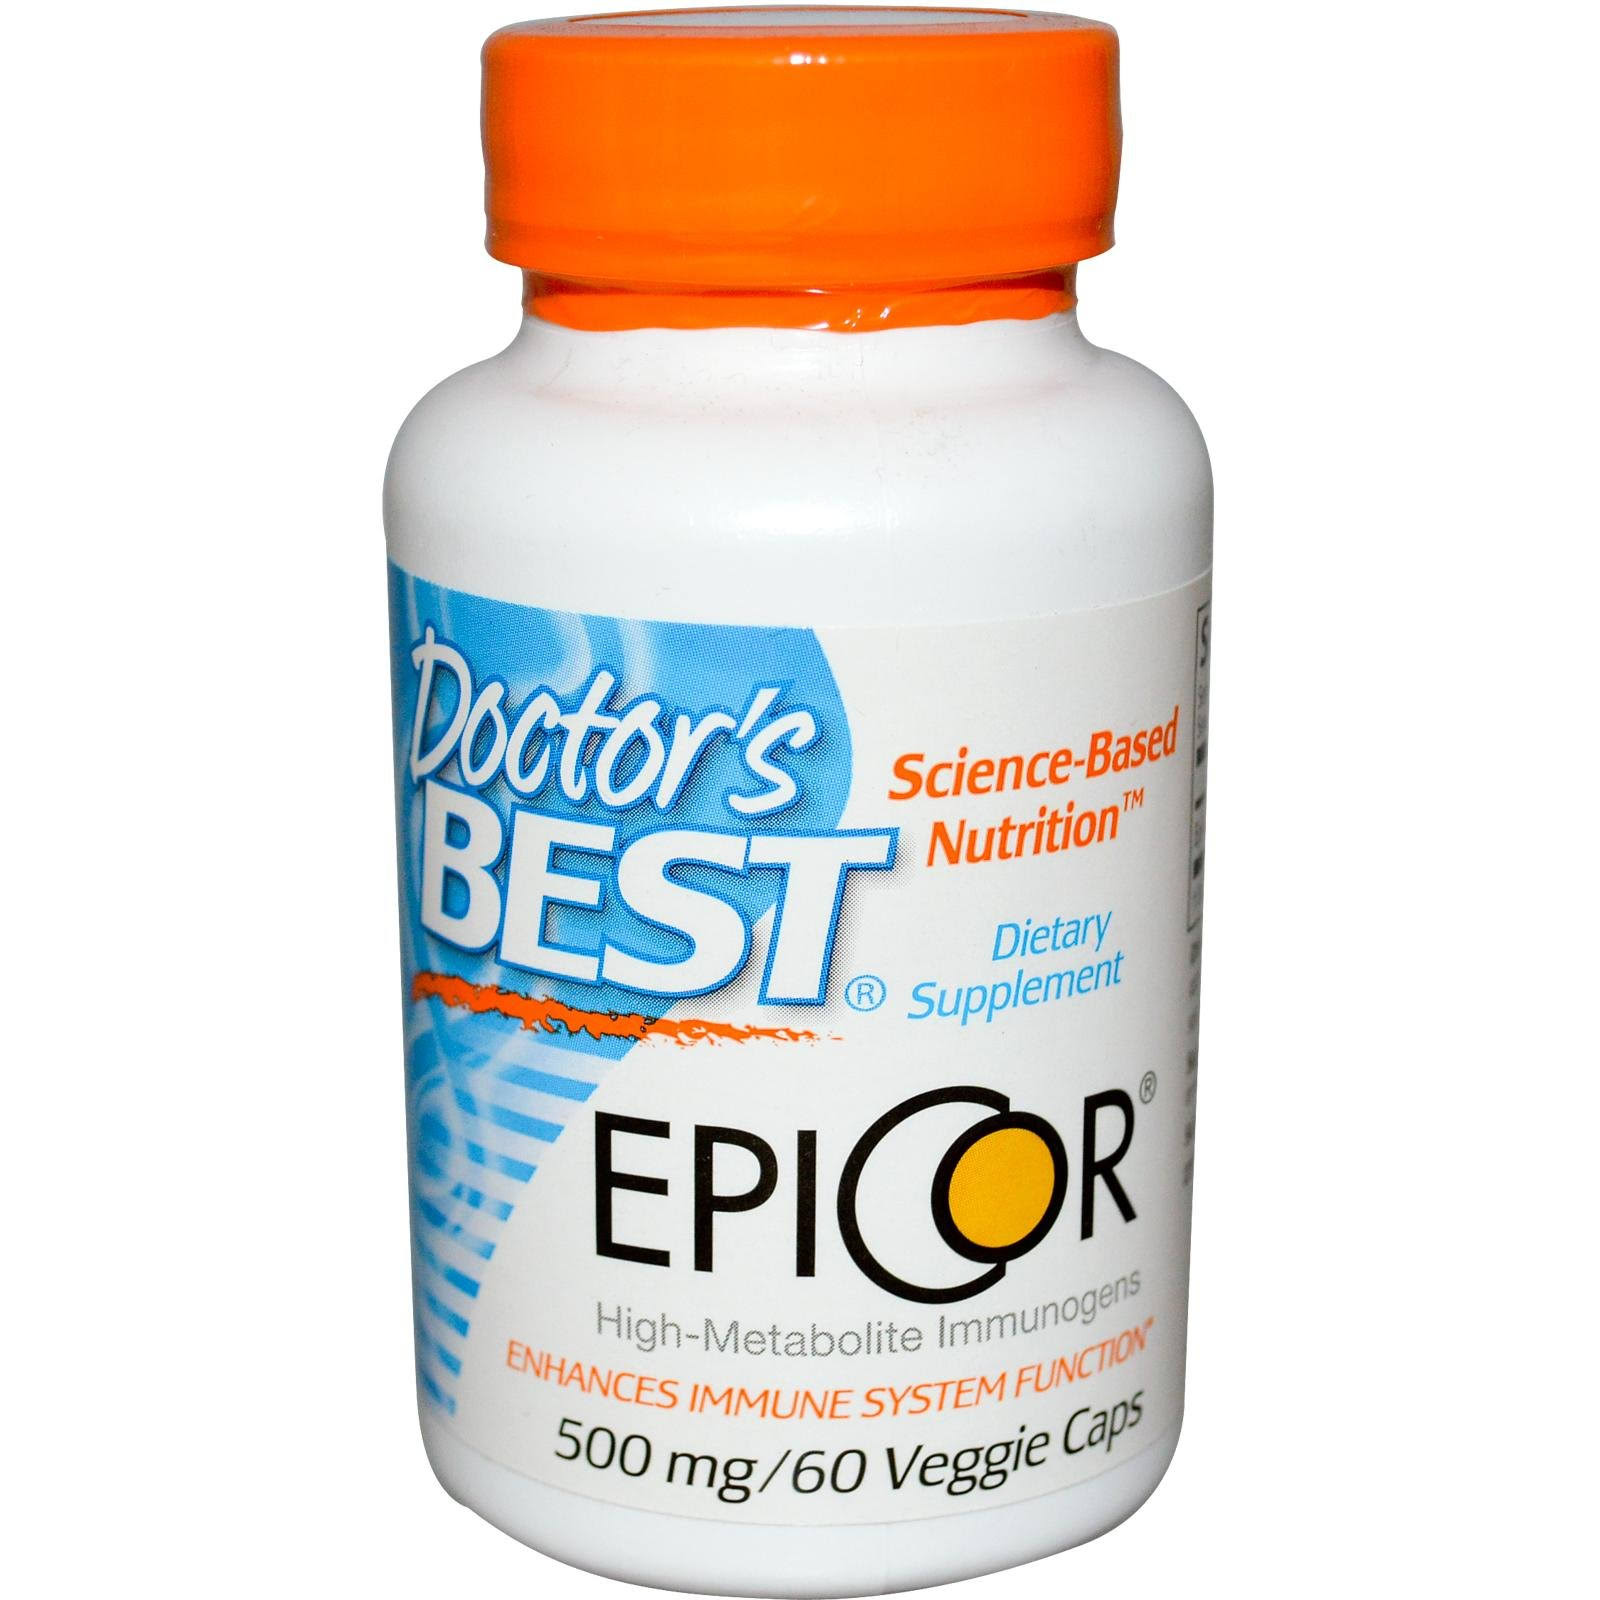 Doctor's Best EpiCor 500mg Dietary Supplement - 60 Capsules